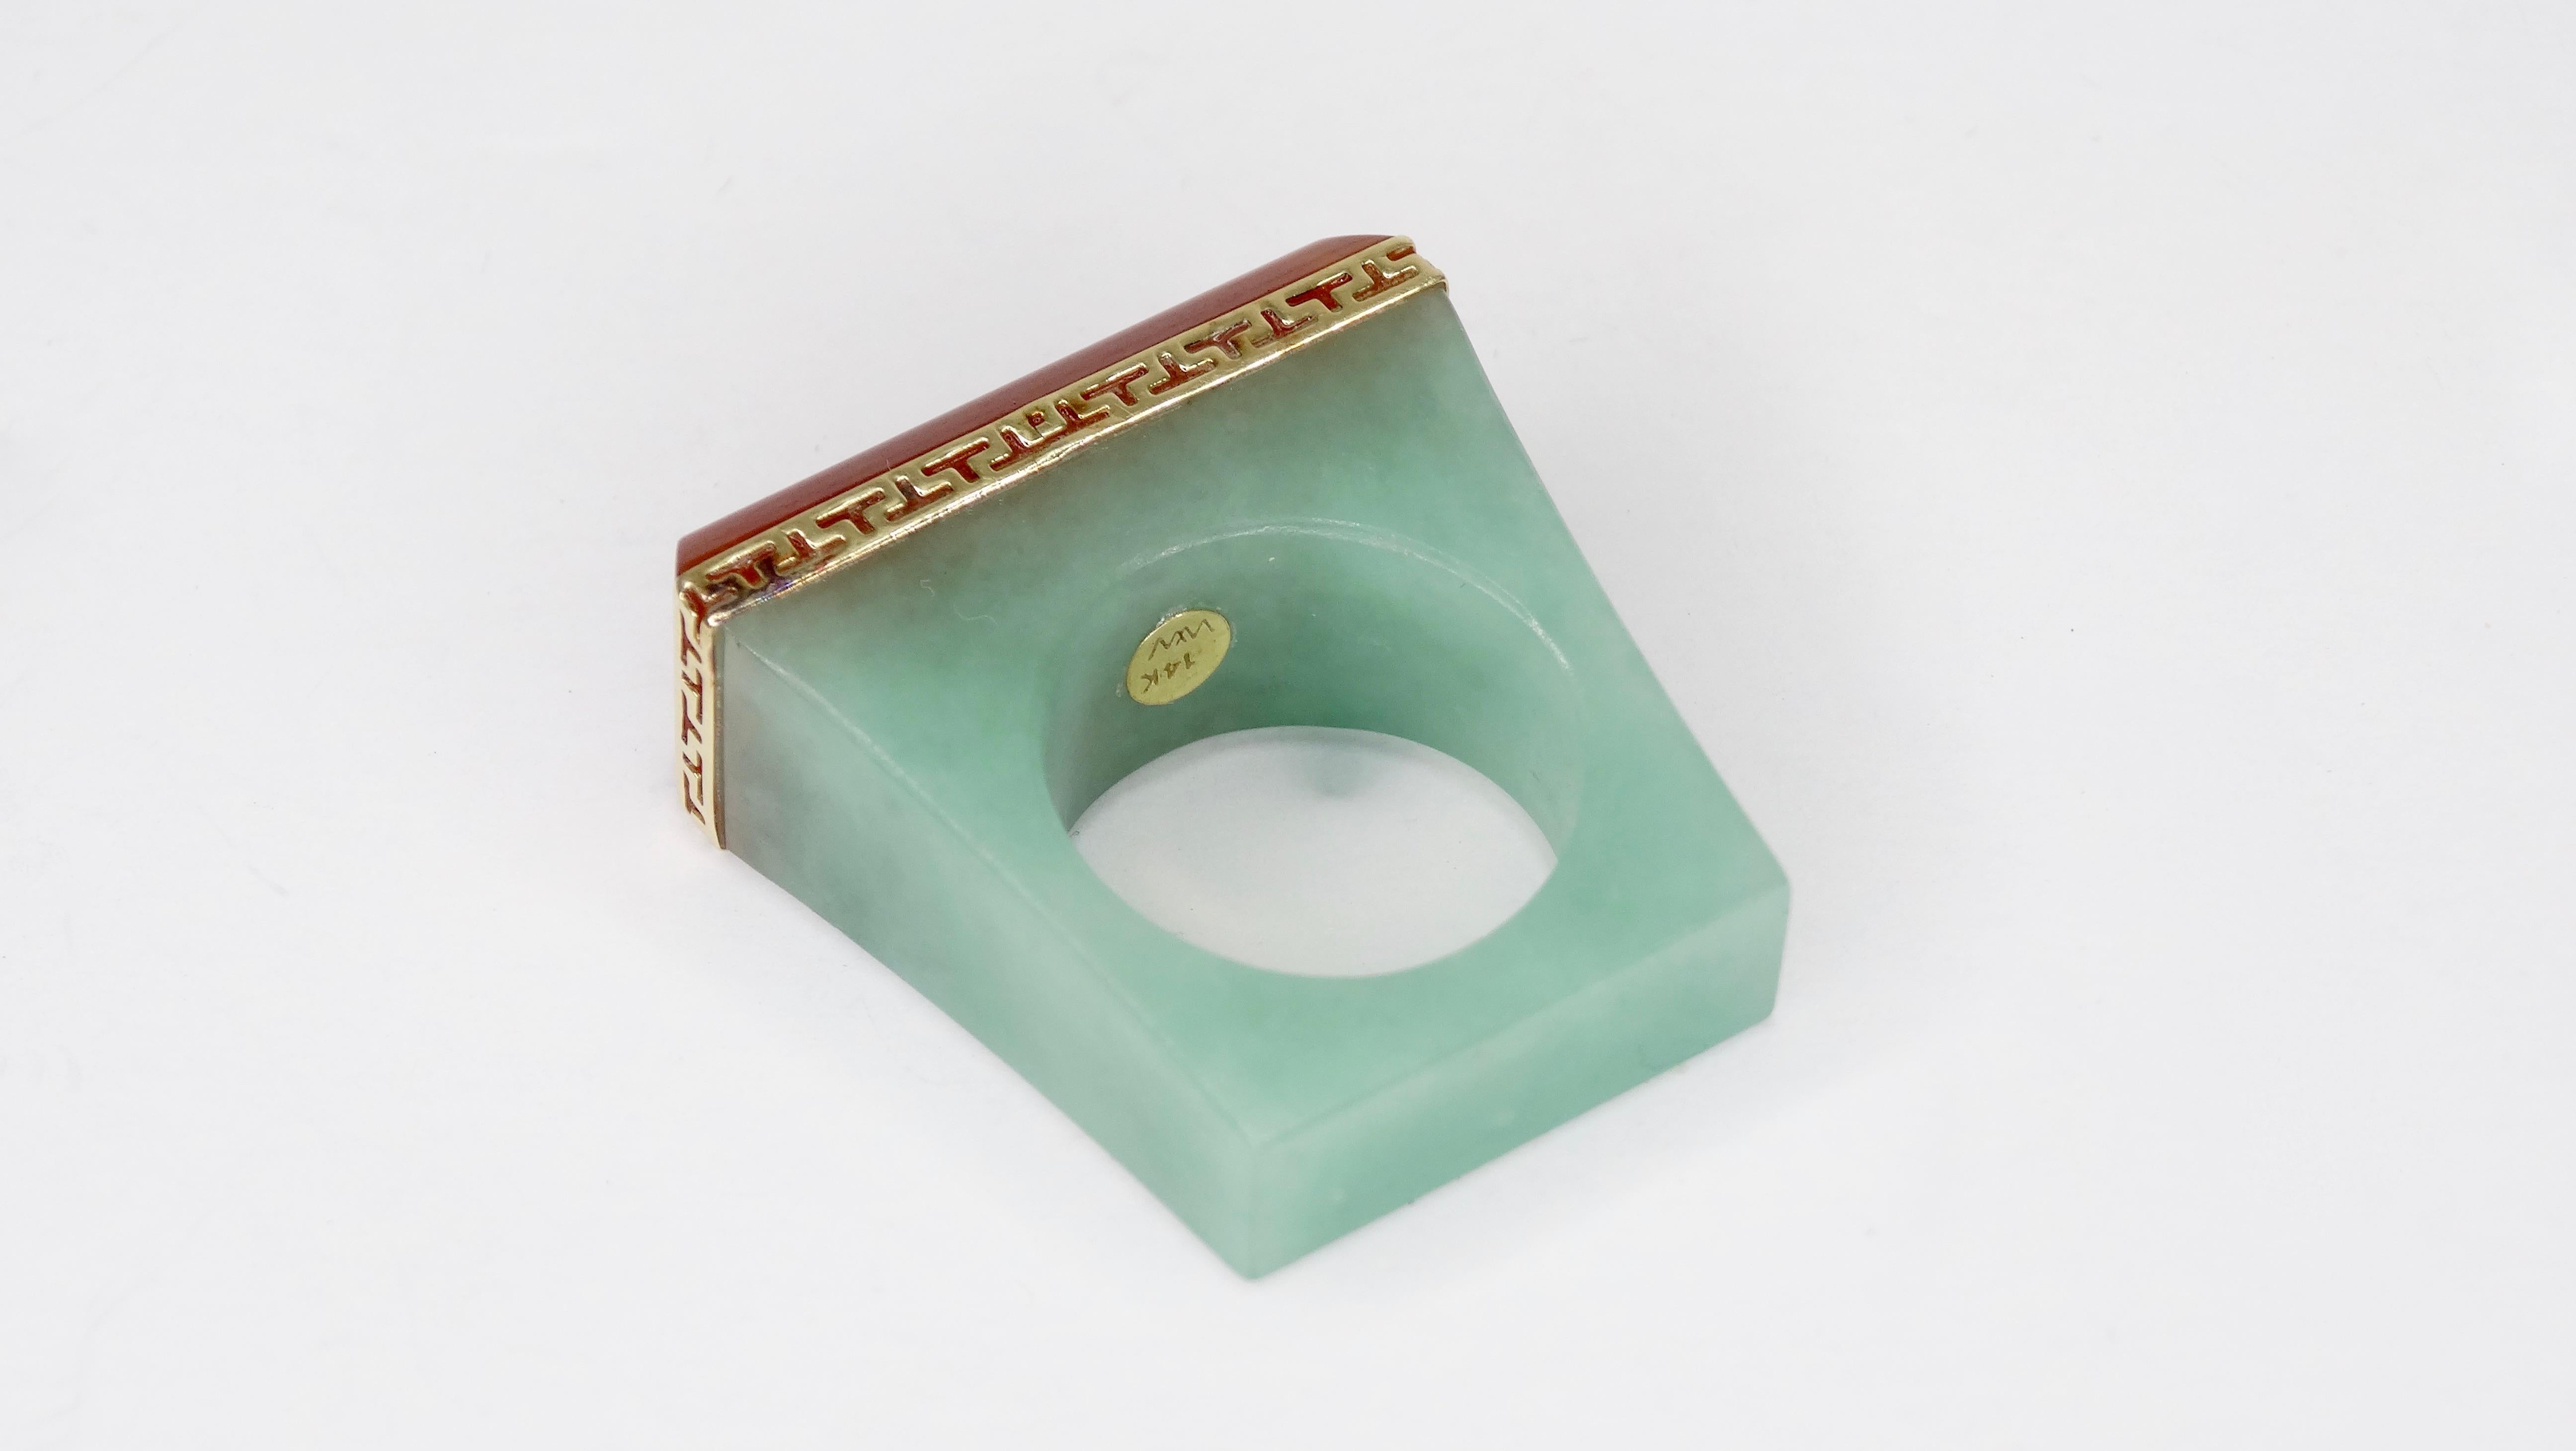 Circa 1980s, this stunning Jade cocktail ring features a rectangular shape and is crafted from Cornelian and Jade. Framing the baguette cut Cornelian is a decorative 14k gold trim. Interior of ring is stamped 14k Gold, WW. Ring is a size 6 and